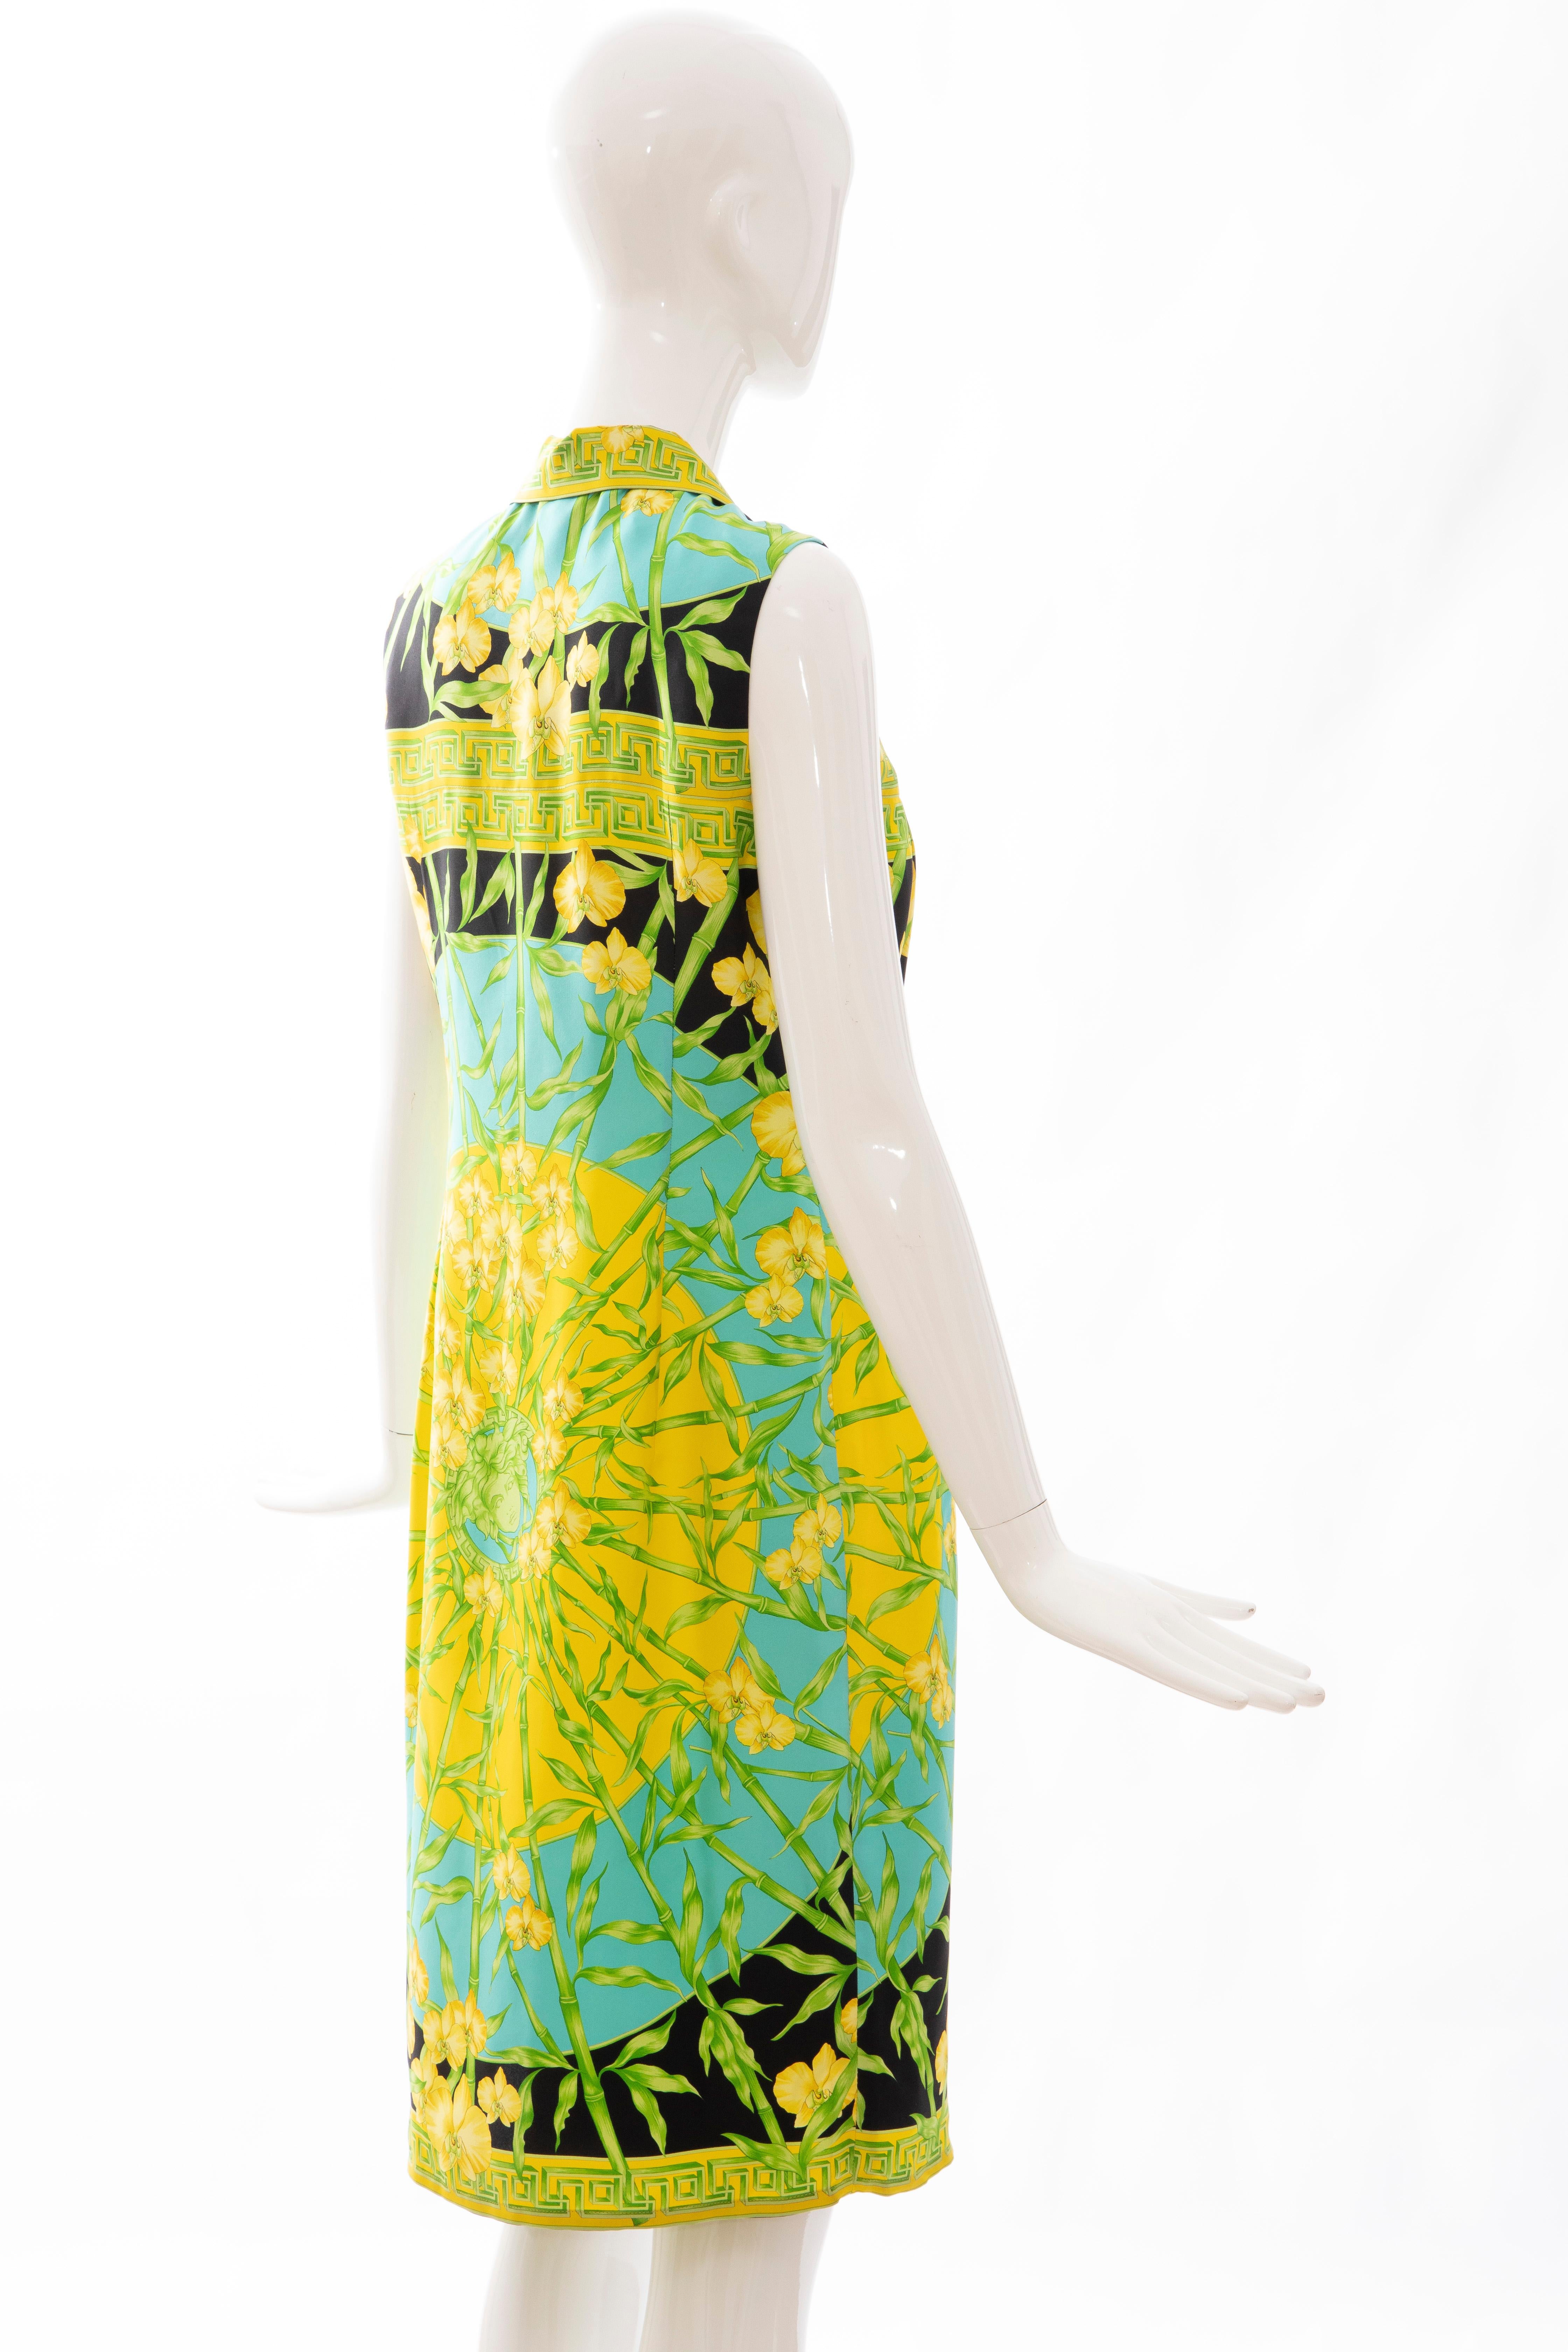 Gianni Versace Couture Silk Printed Yellow Orchids Sheath Dress, Circa: 1990's 1